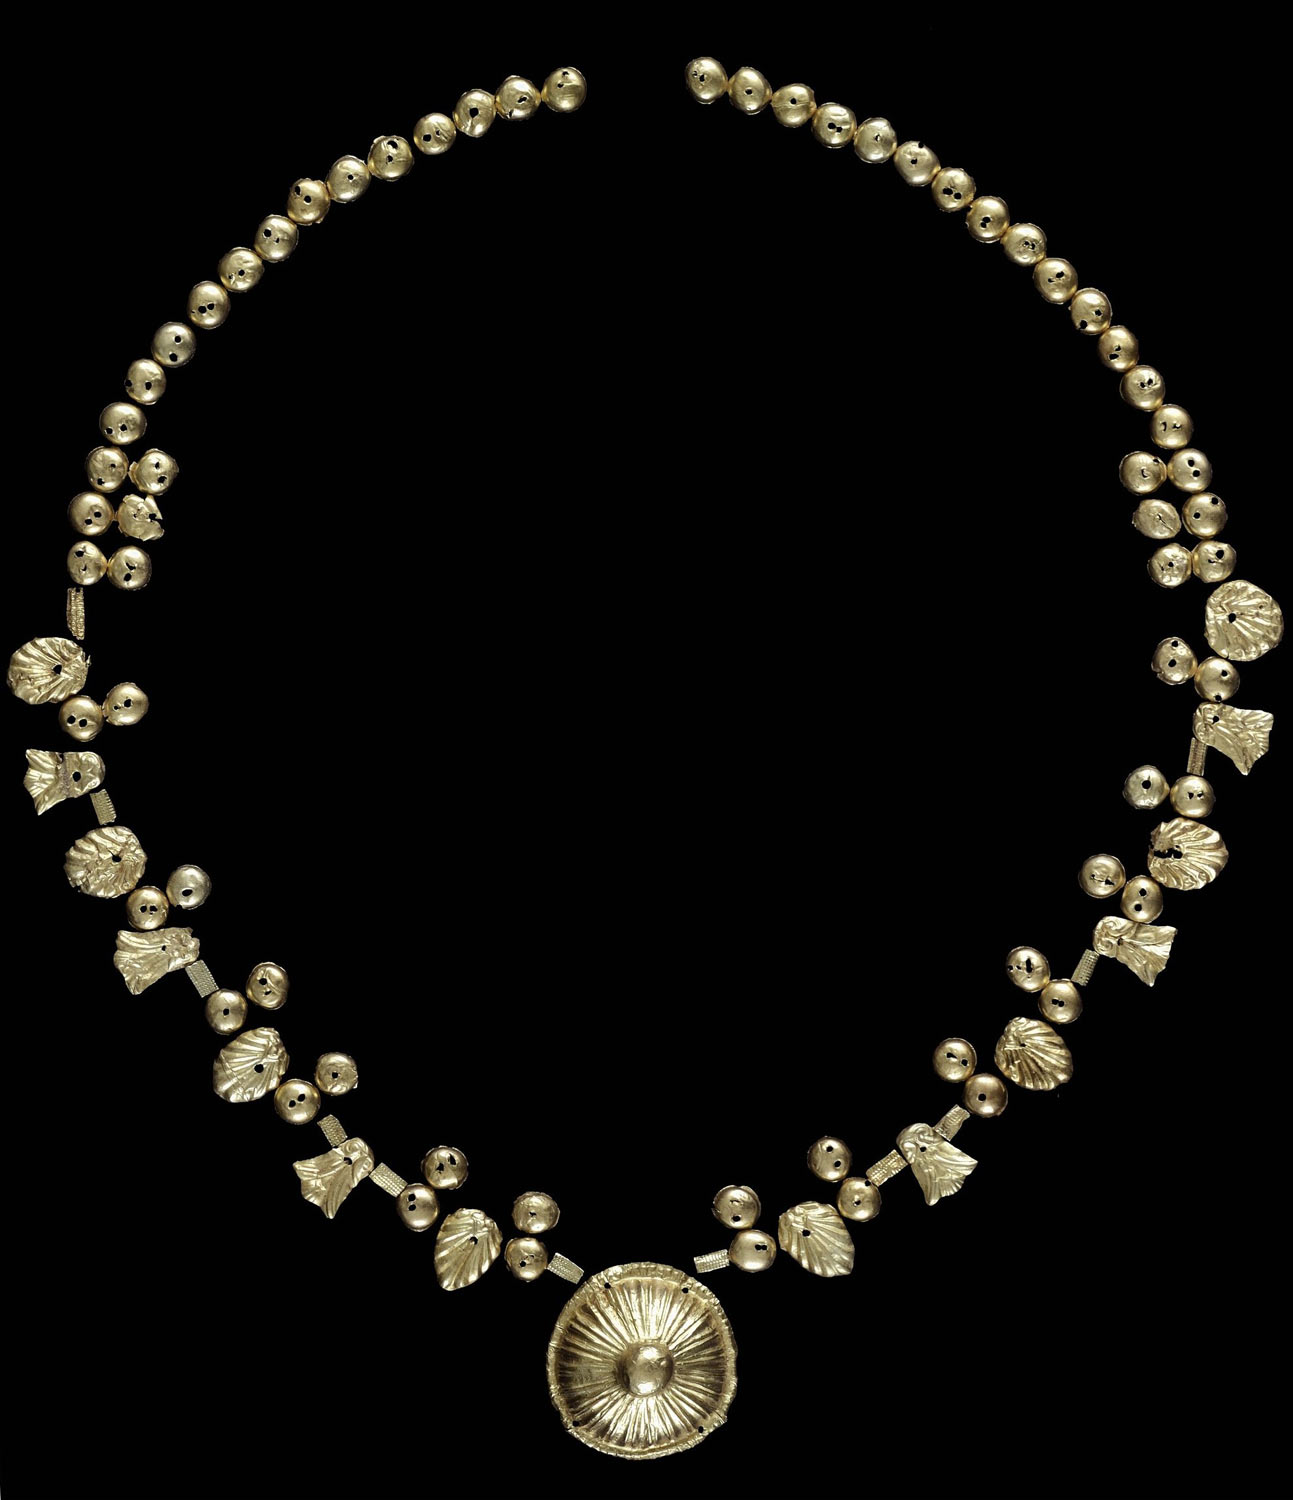 Gold necklace from the tomb of the Pianacce necropolis